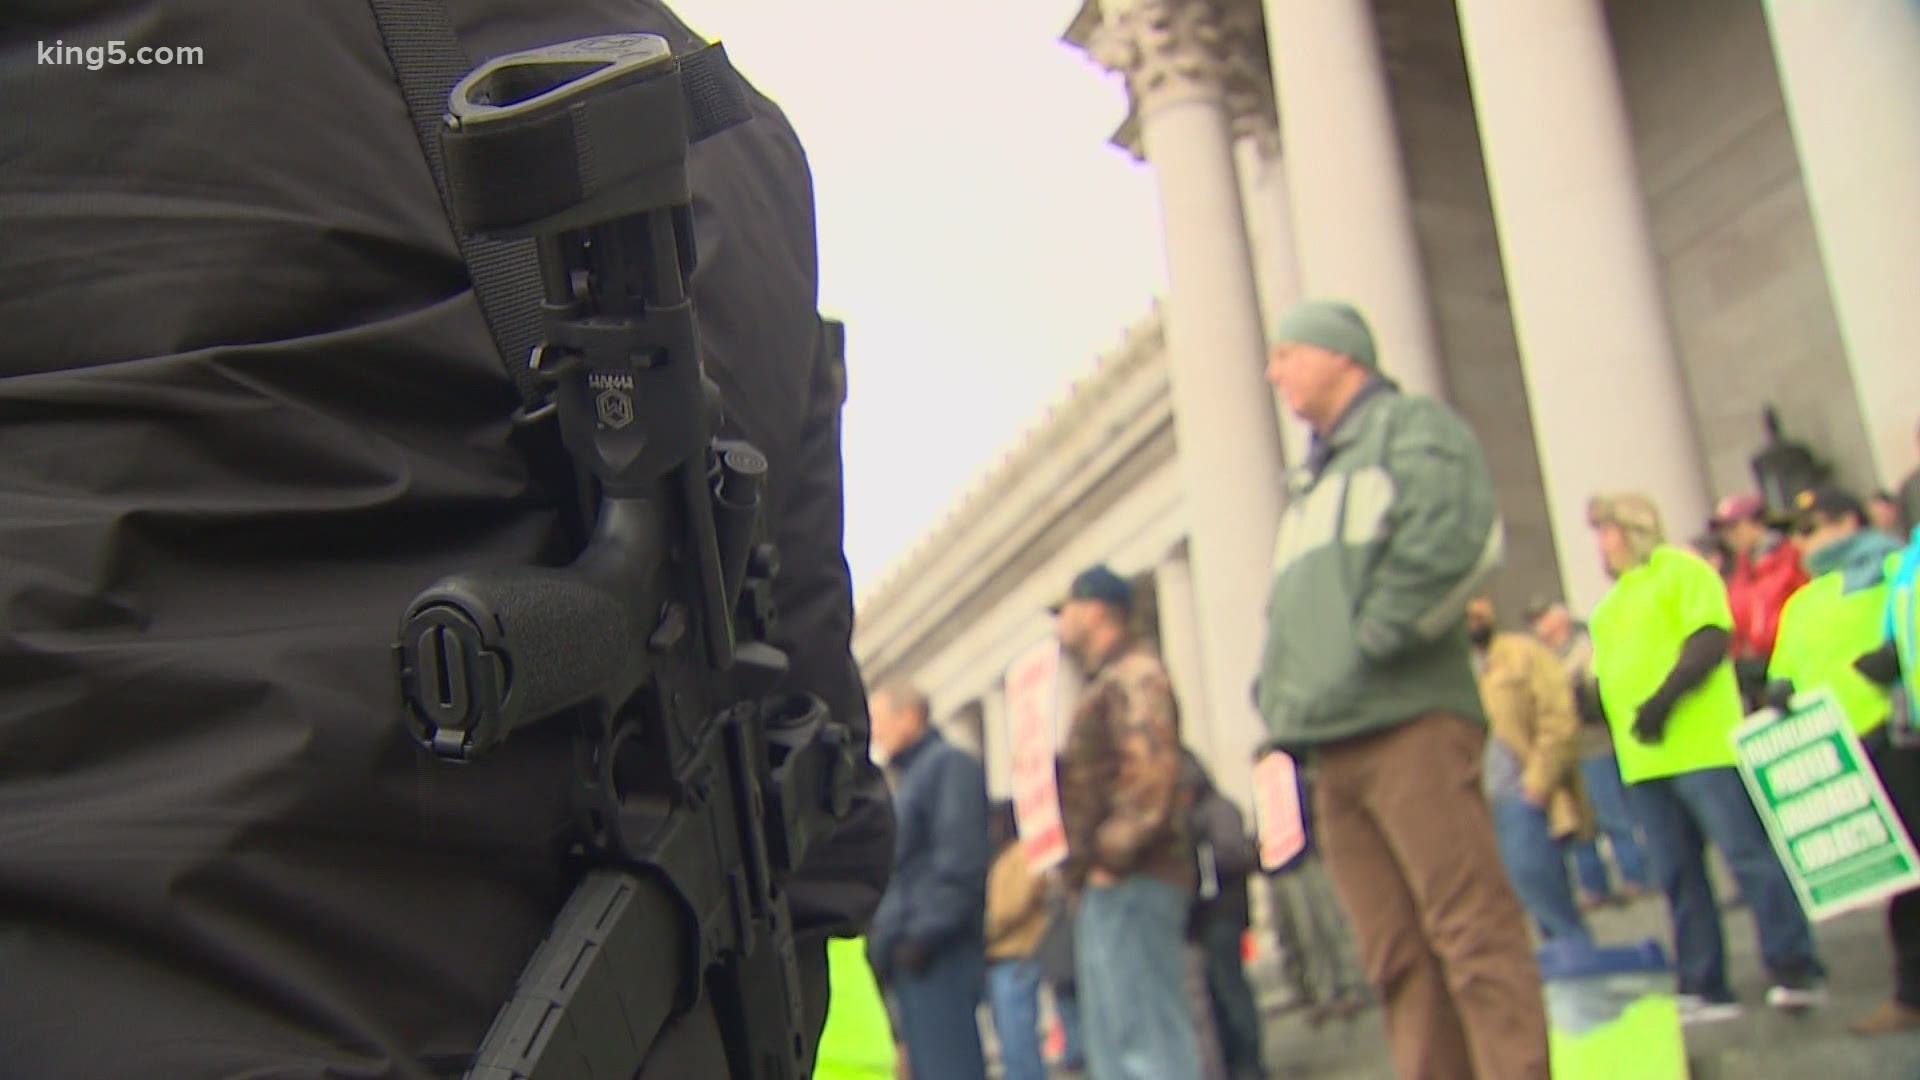 The ban on carrying guns openly would extend to any demonstration across the state. Opponents say that would be unconstitutional.